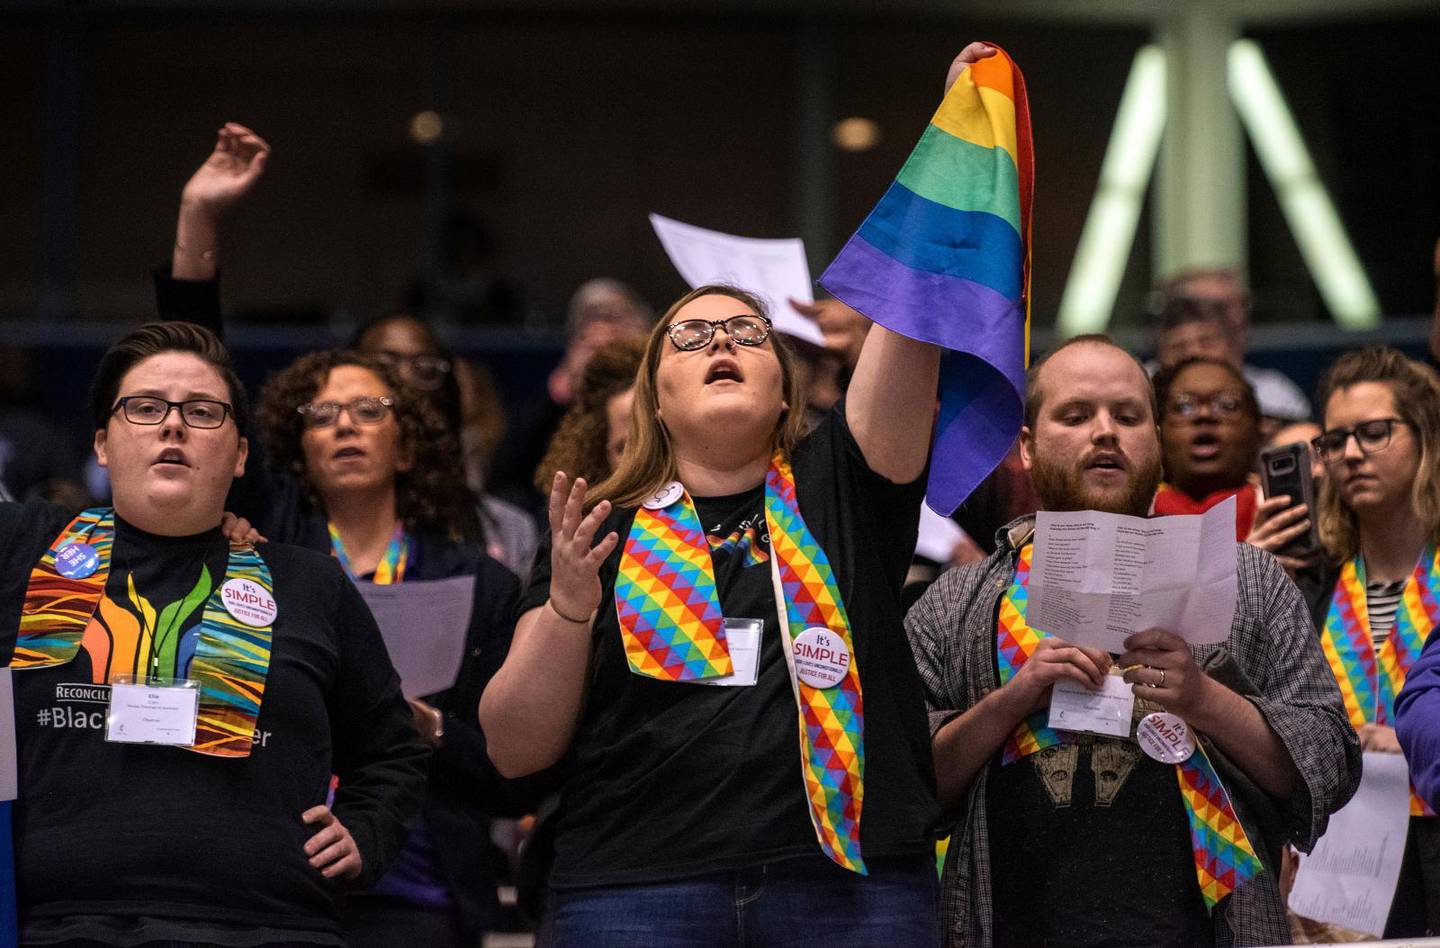 Shelby Ruch-Teegarden, center, of Garrett-Evangelical Theological Seminary joins other protestors during the United Methodist Church''s special session of the general conference in St. Louis, Tuesday, Feb. 26, 2019. America''s second-largest Protestant denomination faces a likely fracture as delegates at the crucial meeting move to strengthen bans on same-sex marriage and ordination of LGBT clergy. (AP Photo/Sid Hastings)